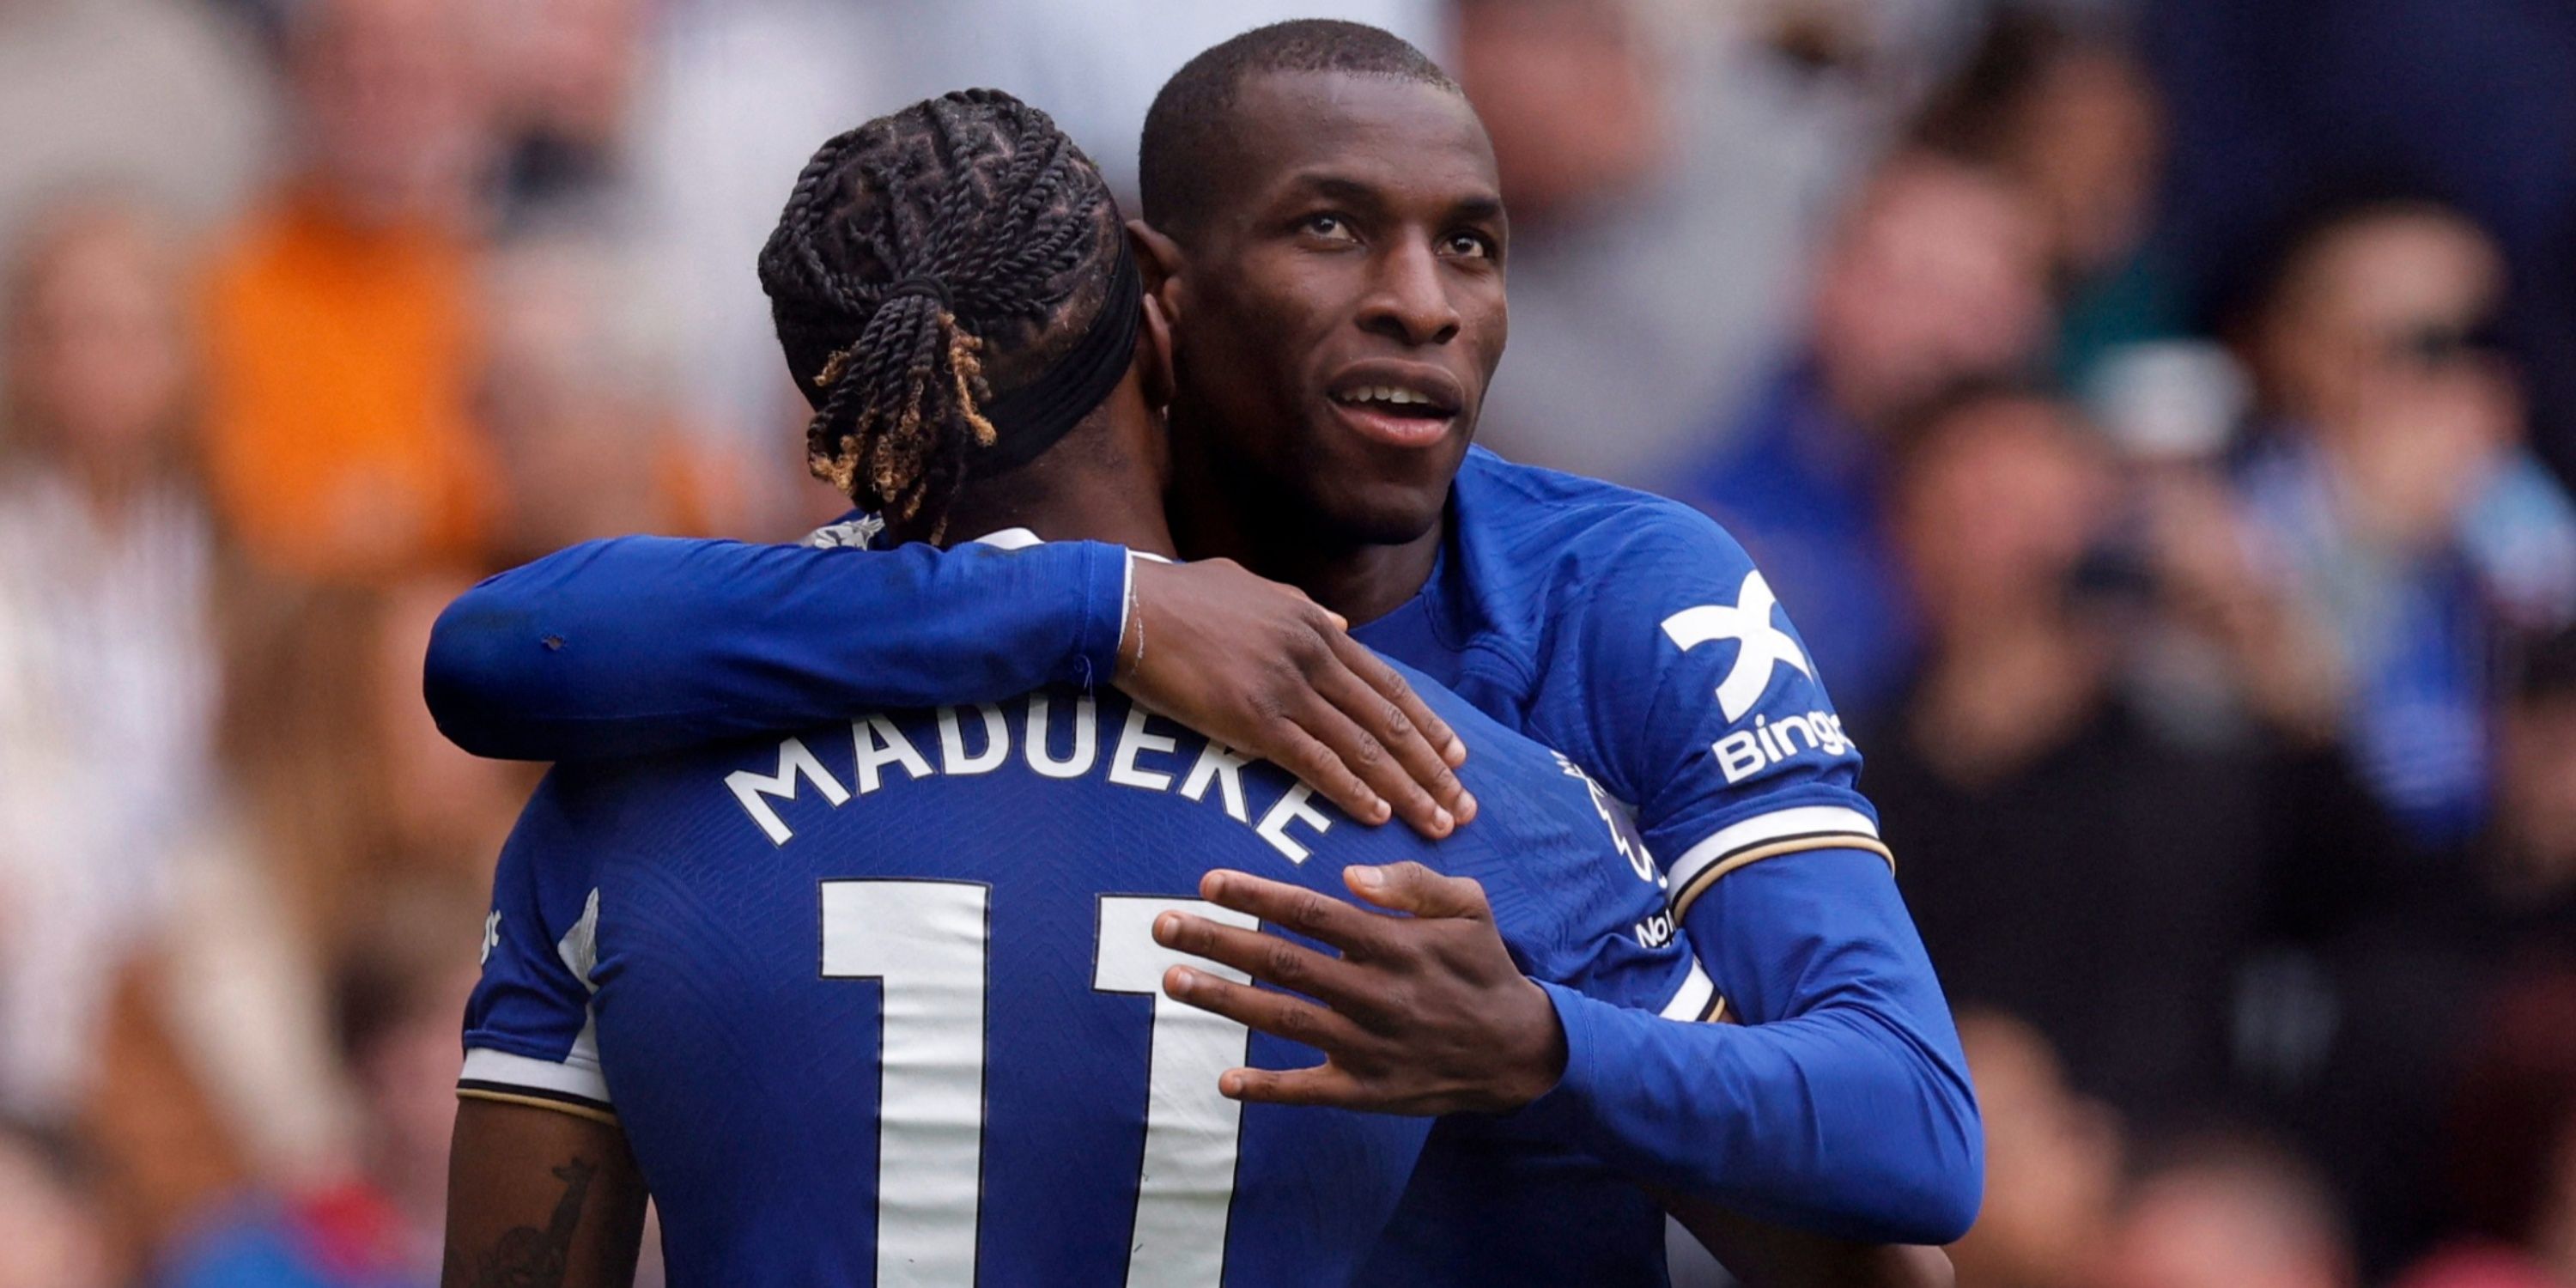 chelsea star with 118 touches was as unplayable as madueke & jackson